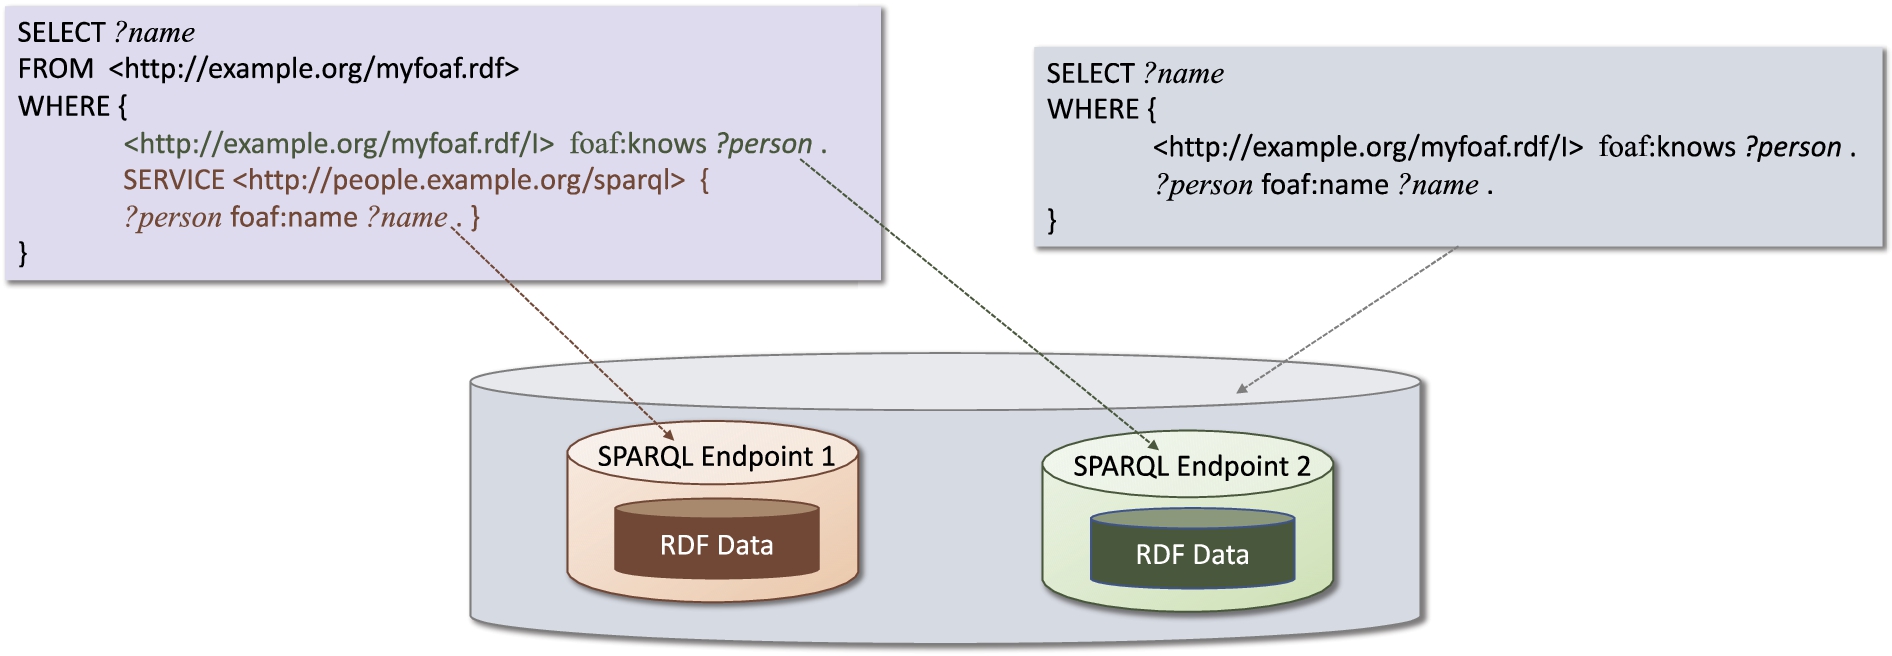 Example of SPARQL query under the explicit federation setting (left-hand side), and its counterpart under the transparent setting (right-hand side).